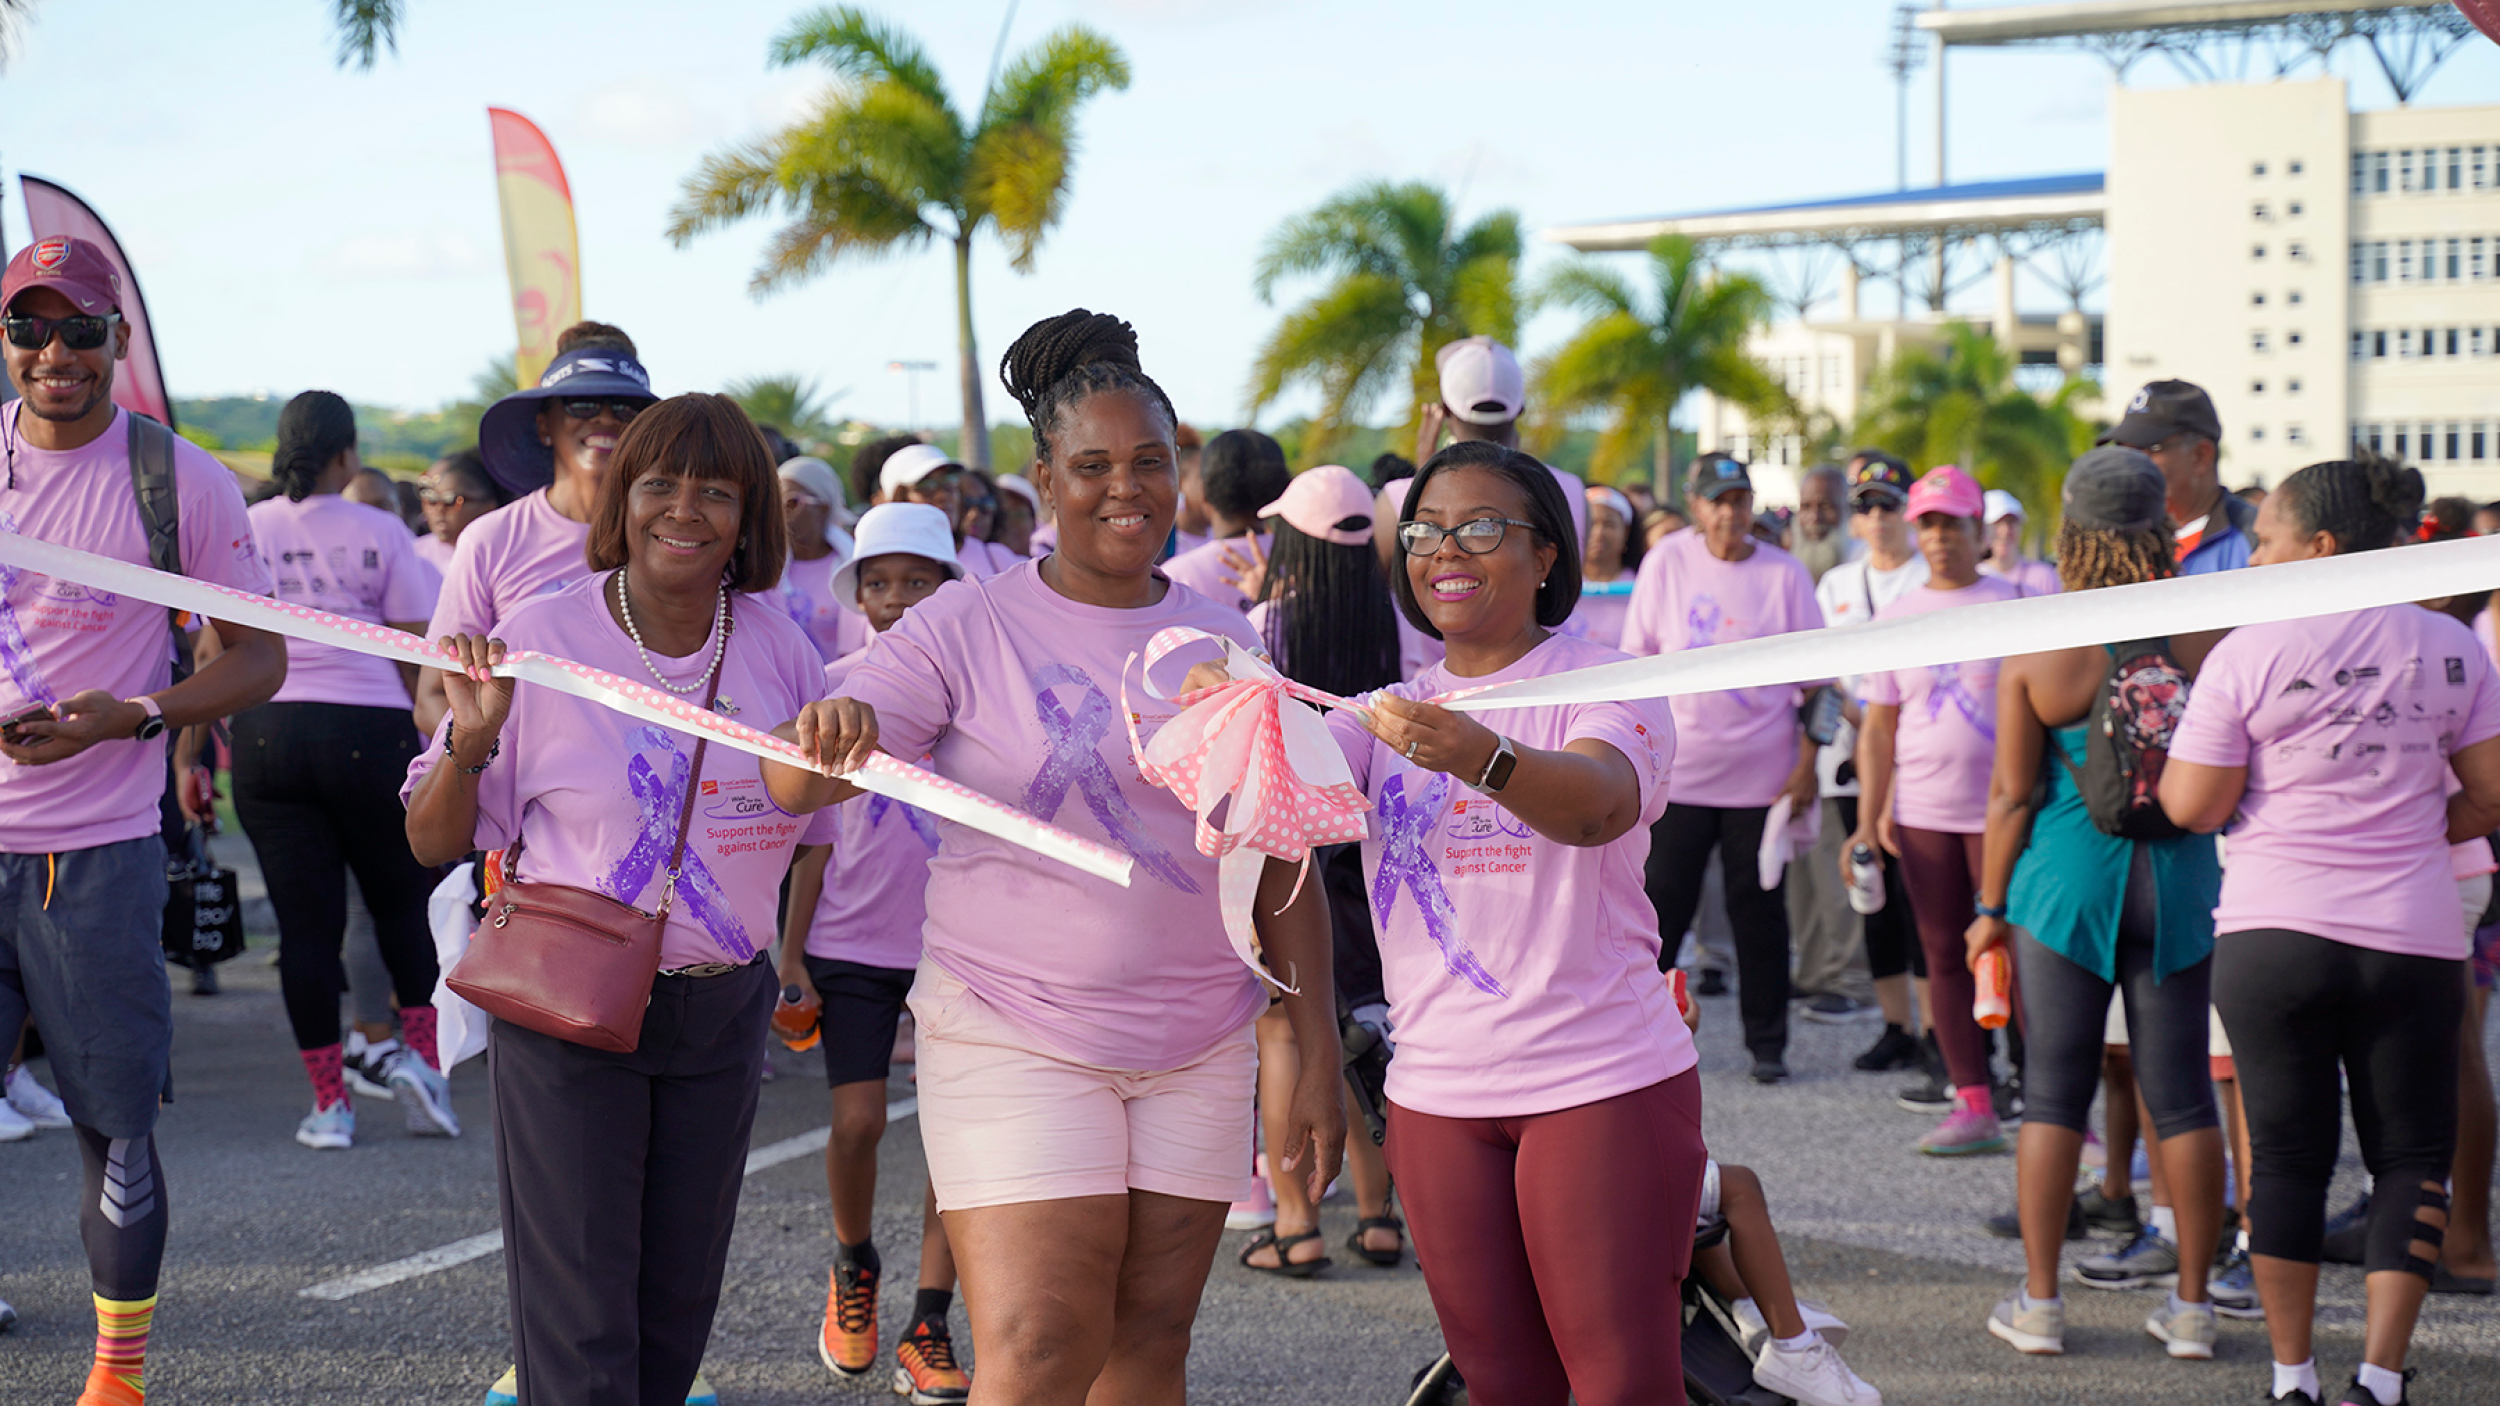 Droves of supporters turn out for annual cancer awareness walk